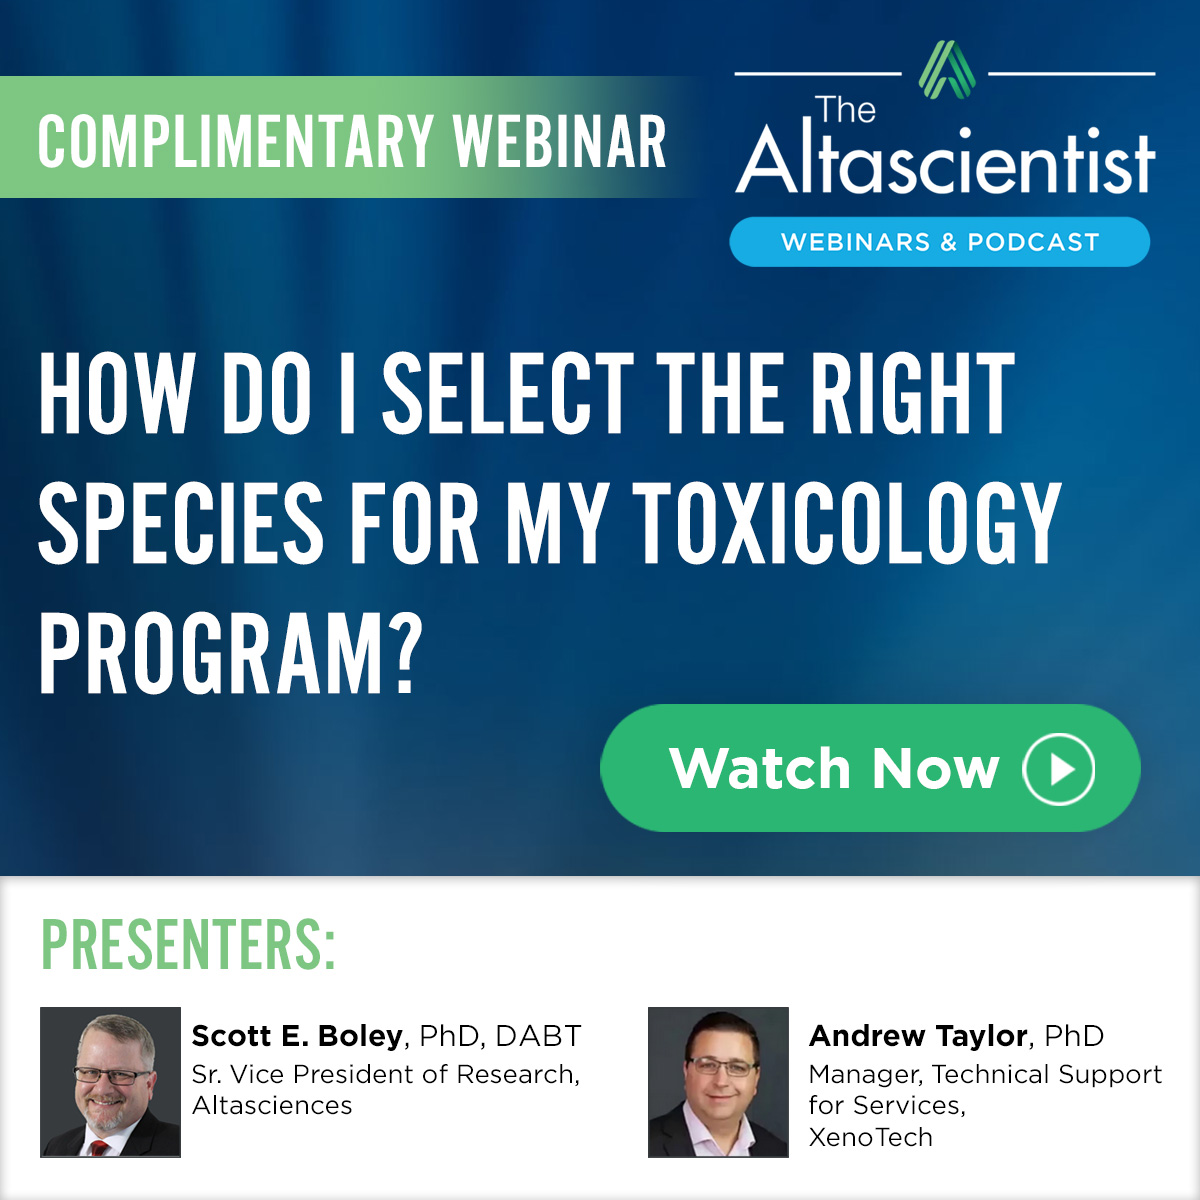 Webinar: How Do I Select the Right Species for My Toxicology Program?